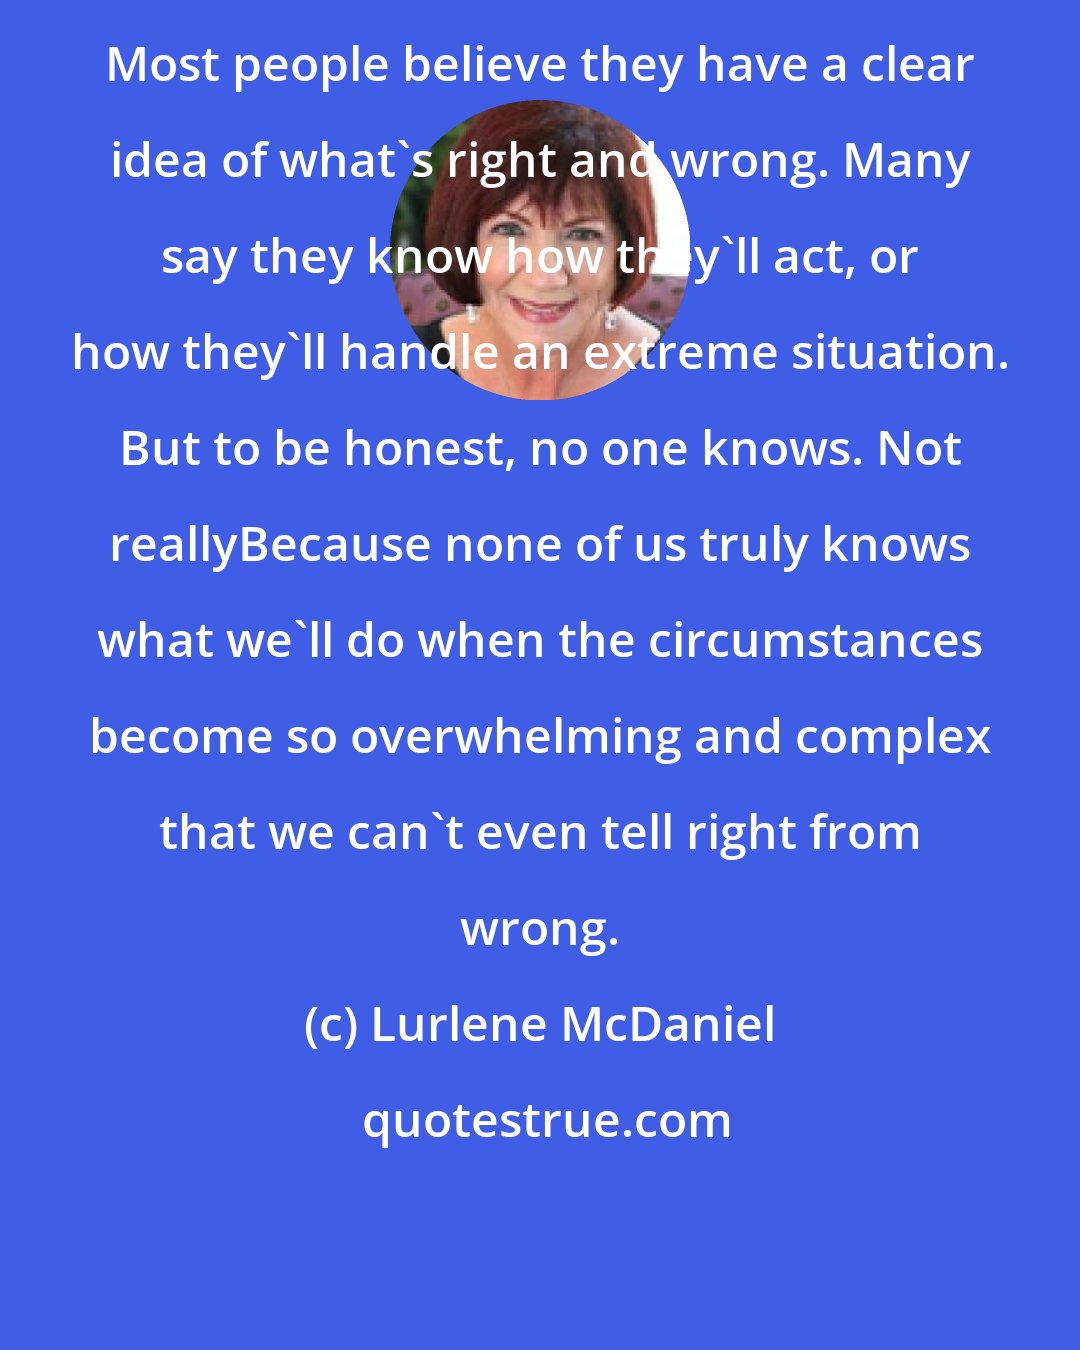 Lurlene McDaniel: Most people believe they have a clear idea of what's right and wrong. Many say they know how they'll act, or how they'll handle an extreme situation. But to be honest, no one knows. Not reallyBecause none of us truly knows what we'll do when the circumstances become so overwhelming and complex that we can't even tell right from wrong.